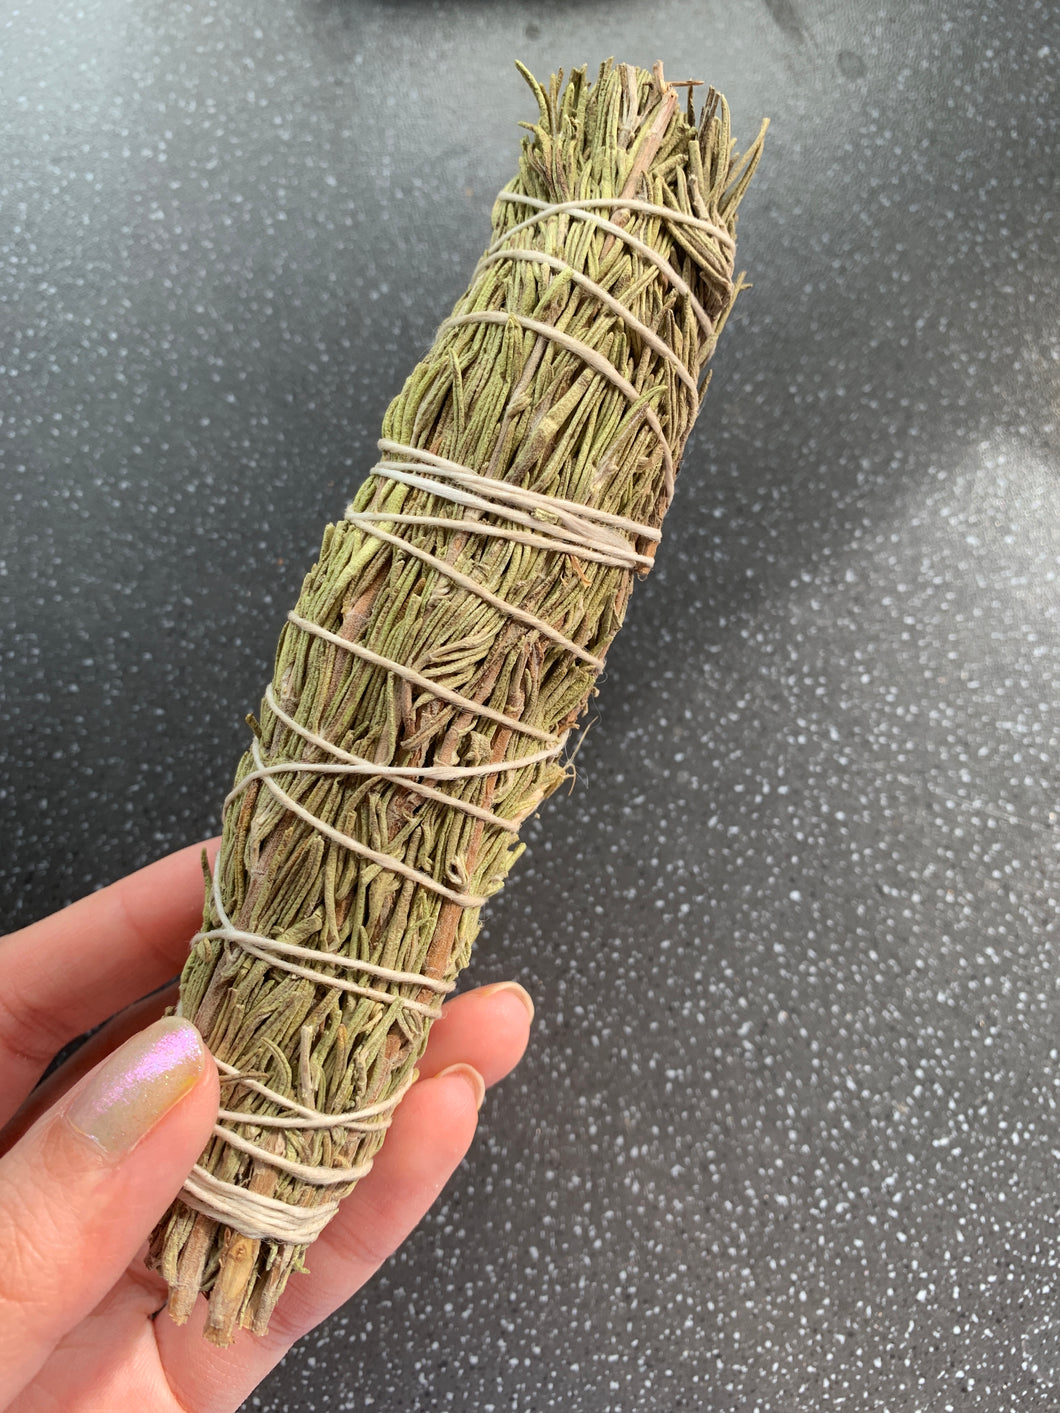 Black Magic & Evil Eye Protection Rosemary Sage Smudge Stick for Protection Against Hexes, Curses, Spells, Voodoo